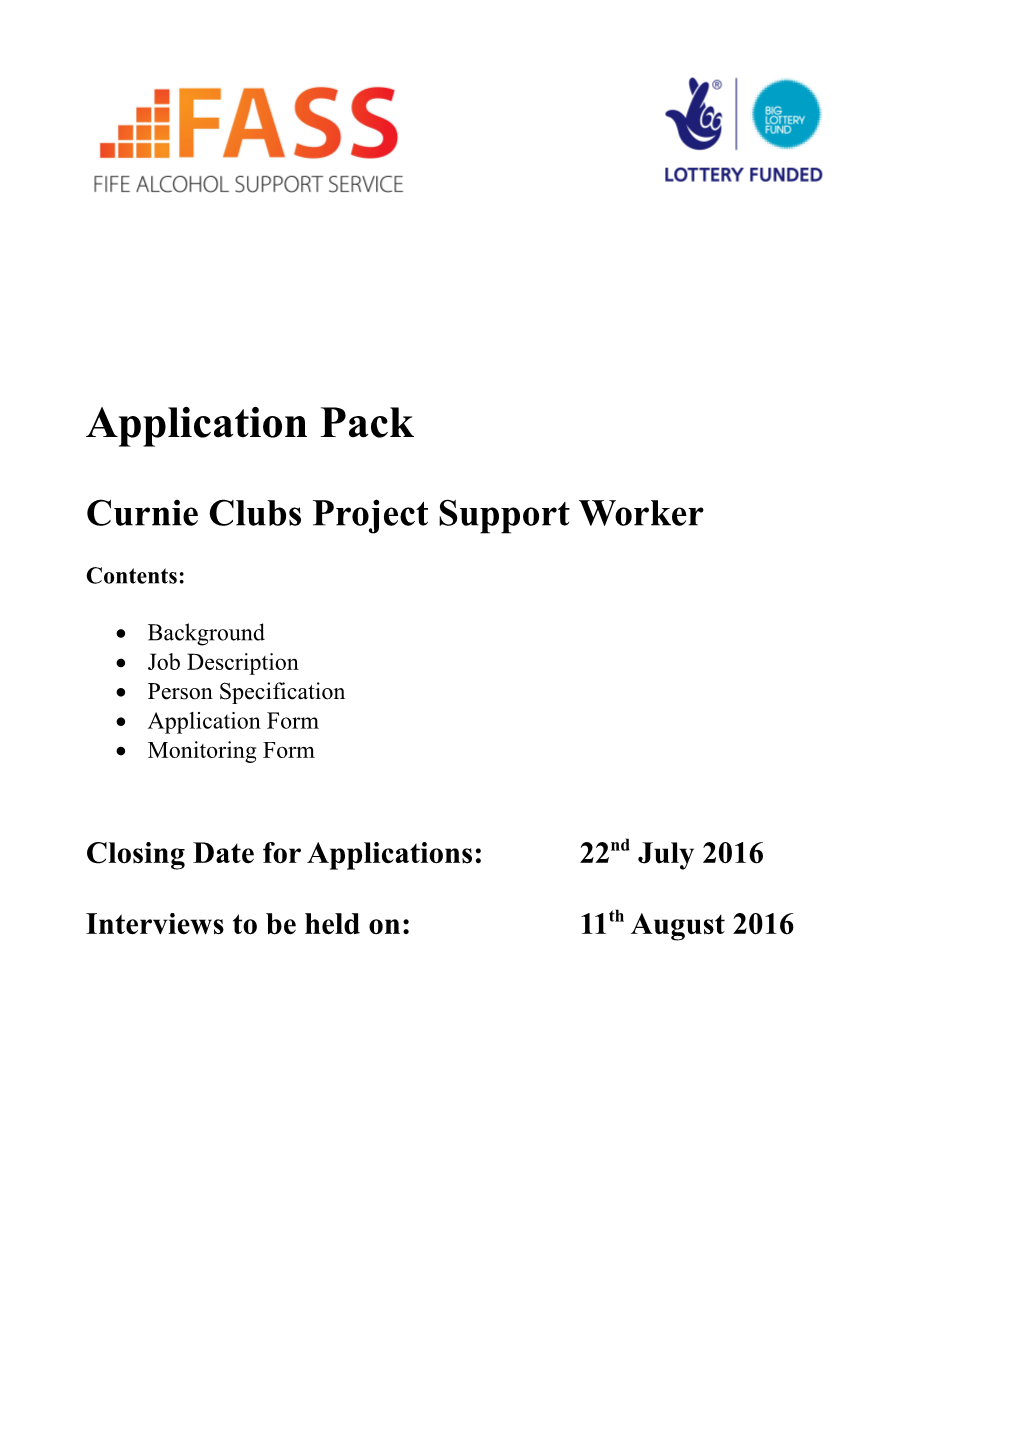 Curnie Clubs Project Support Worker